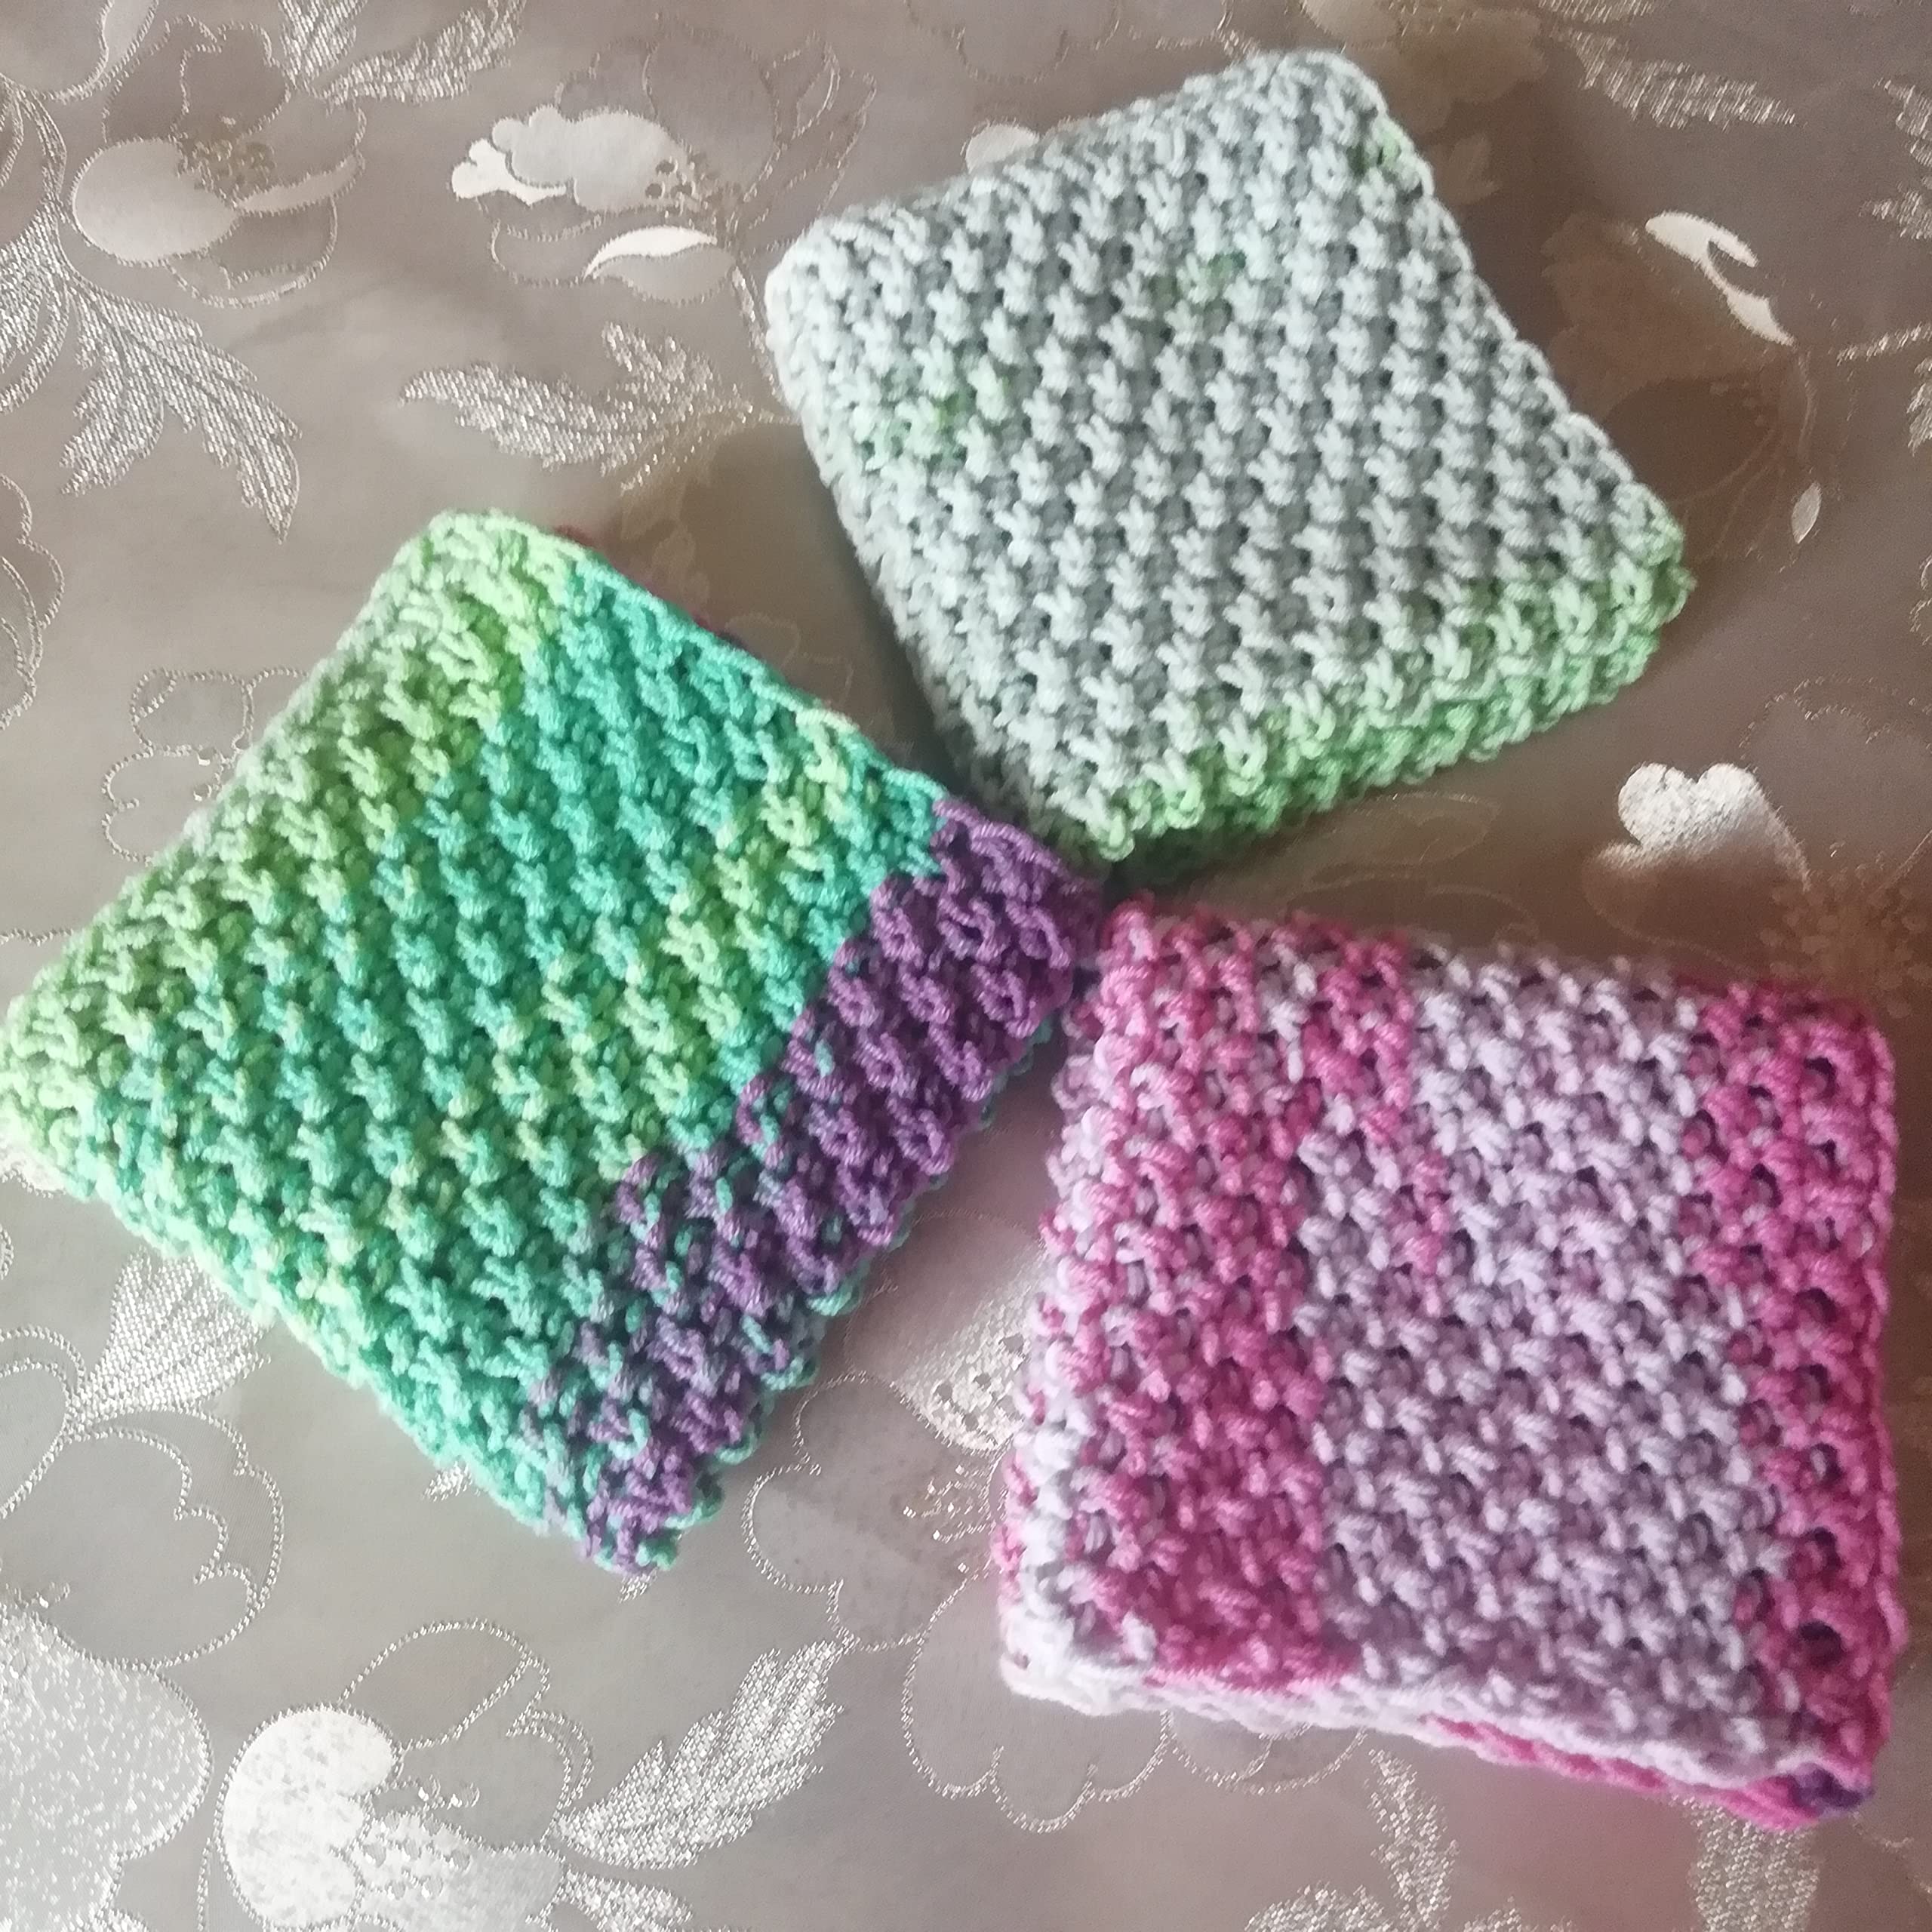 Colorful Set 3 Cotton Washcloths Super Absorbent Reusable Dishcloths Knitwear Square Soft Ecology Rags